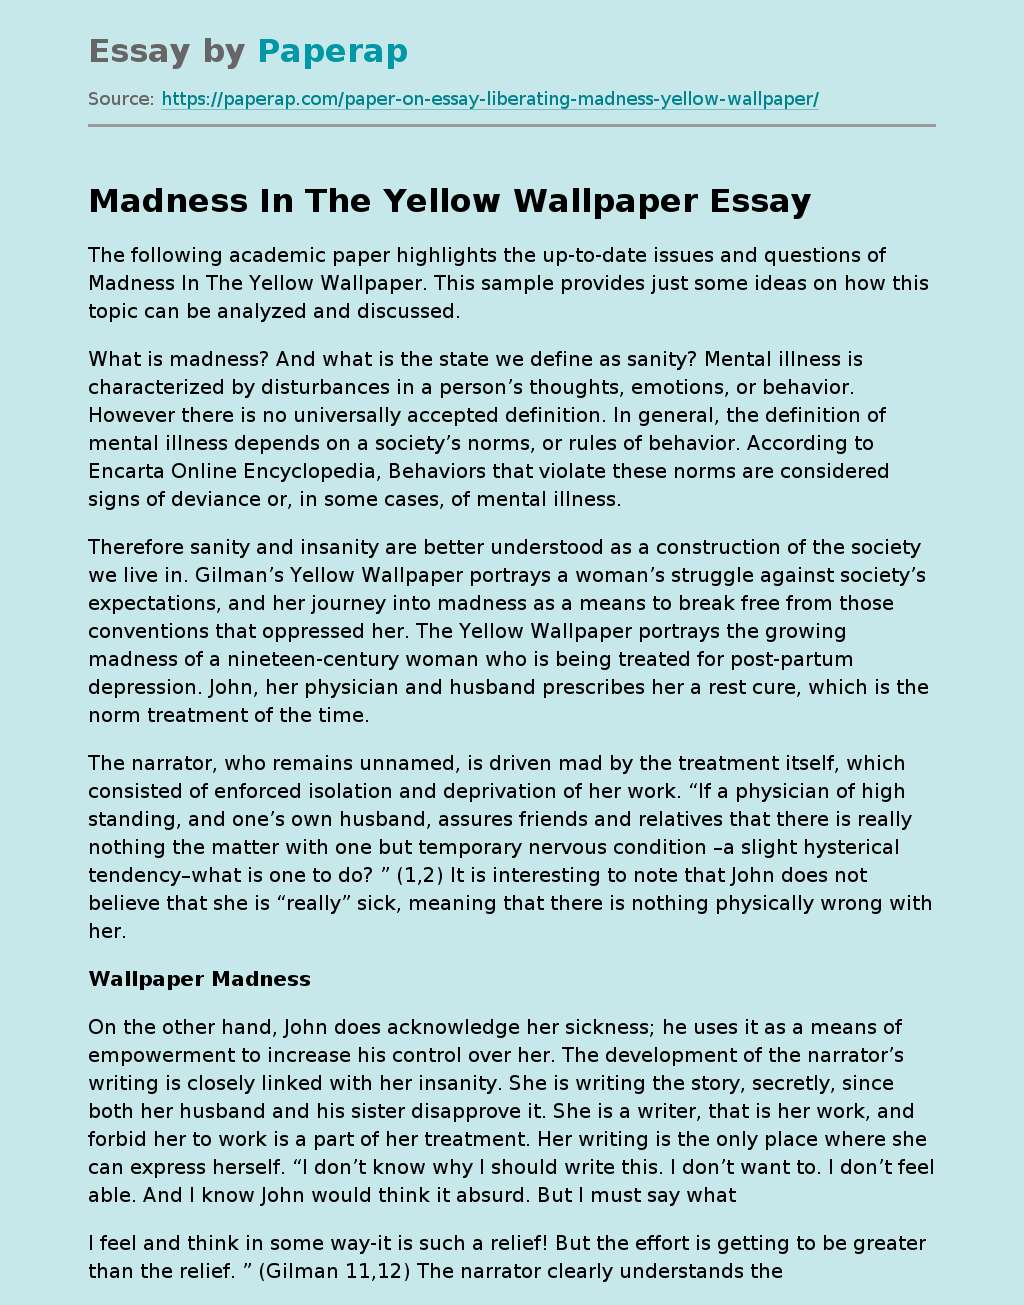 Madness In The Yellow Wallpaper